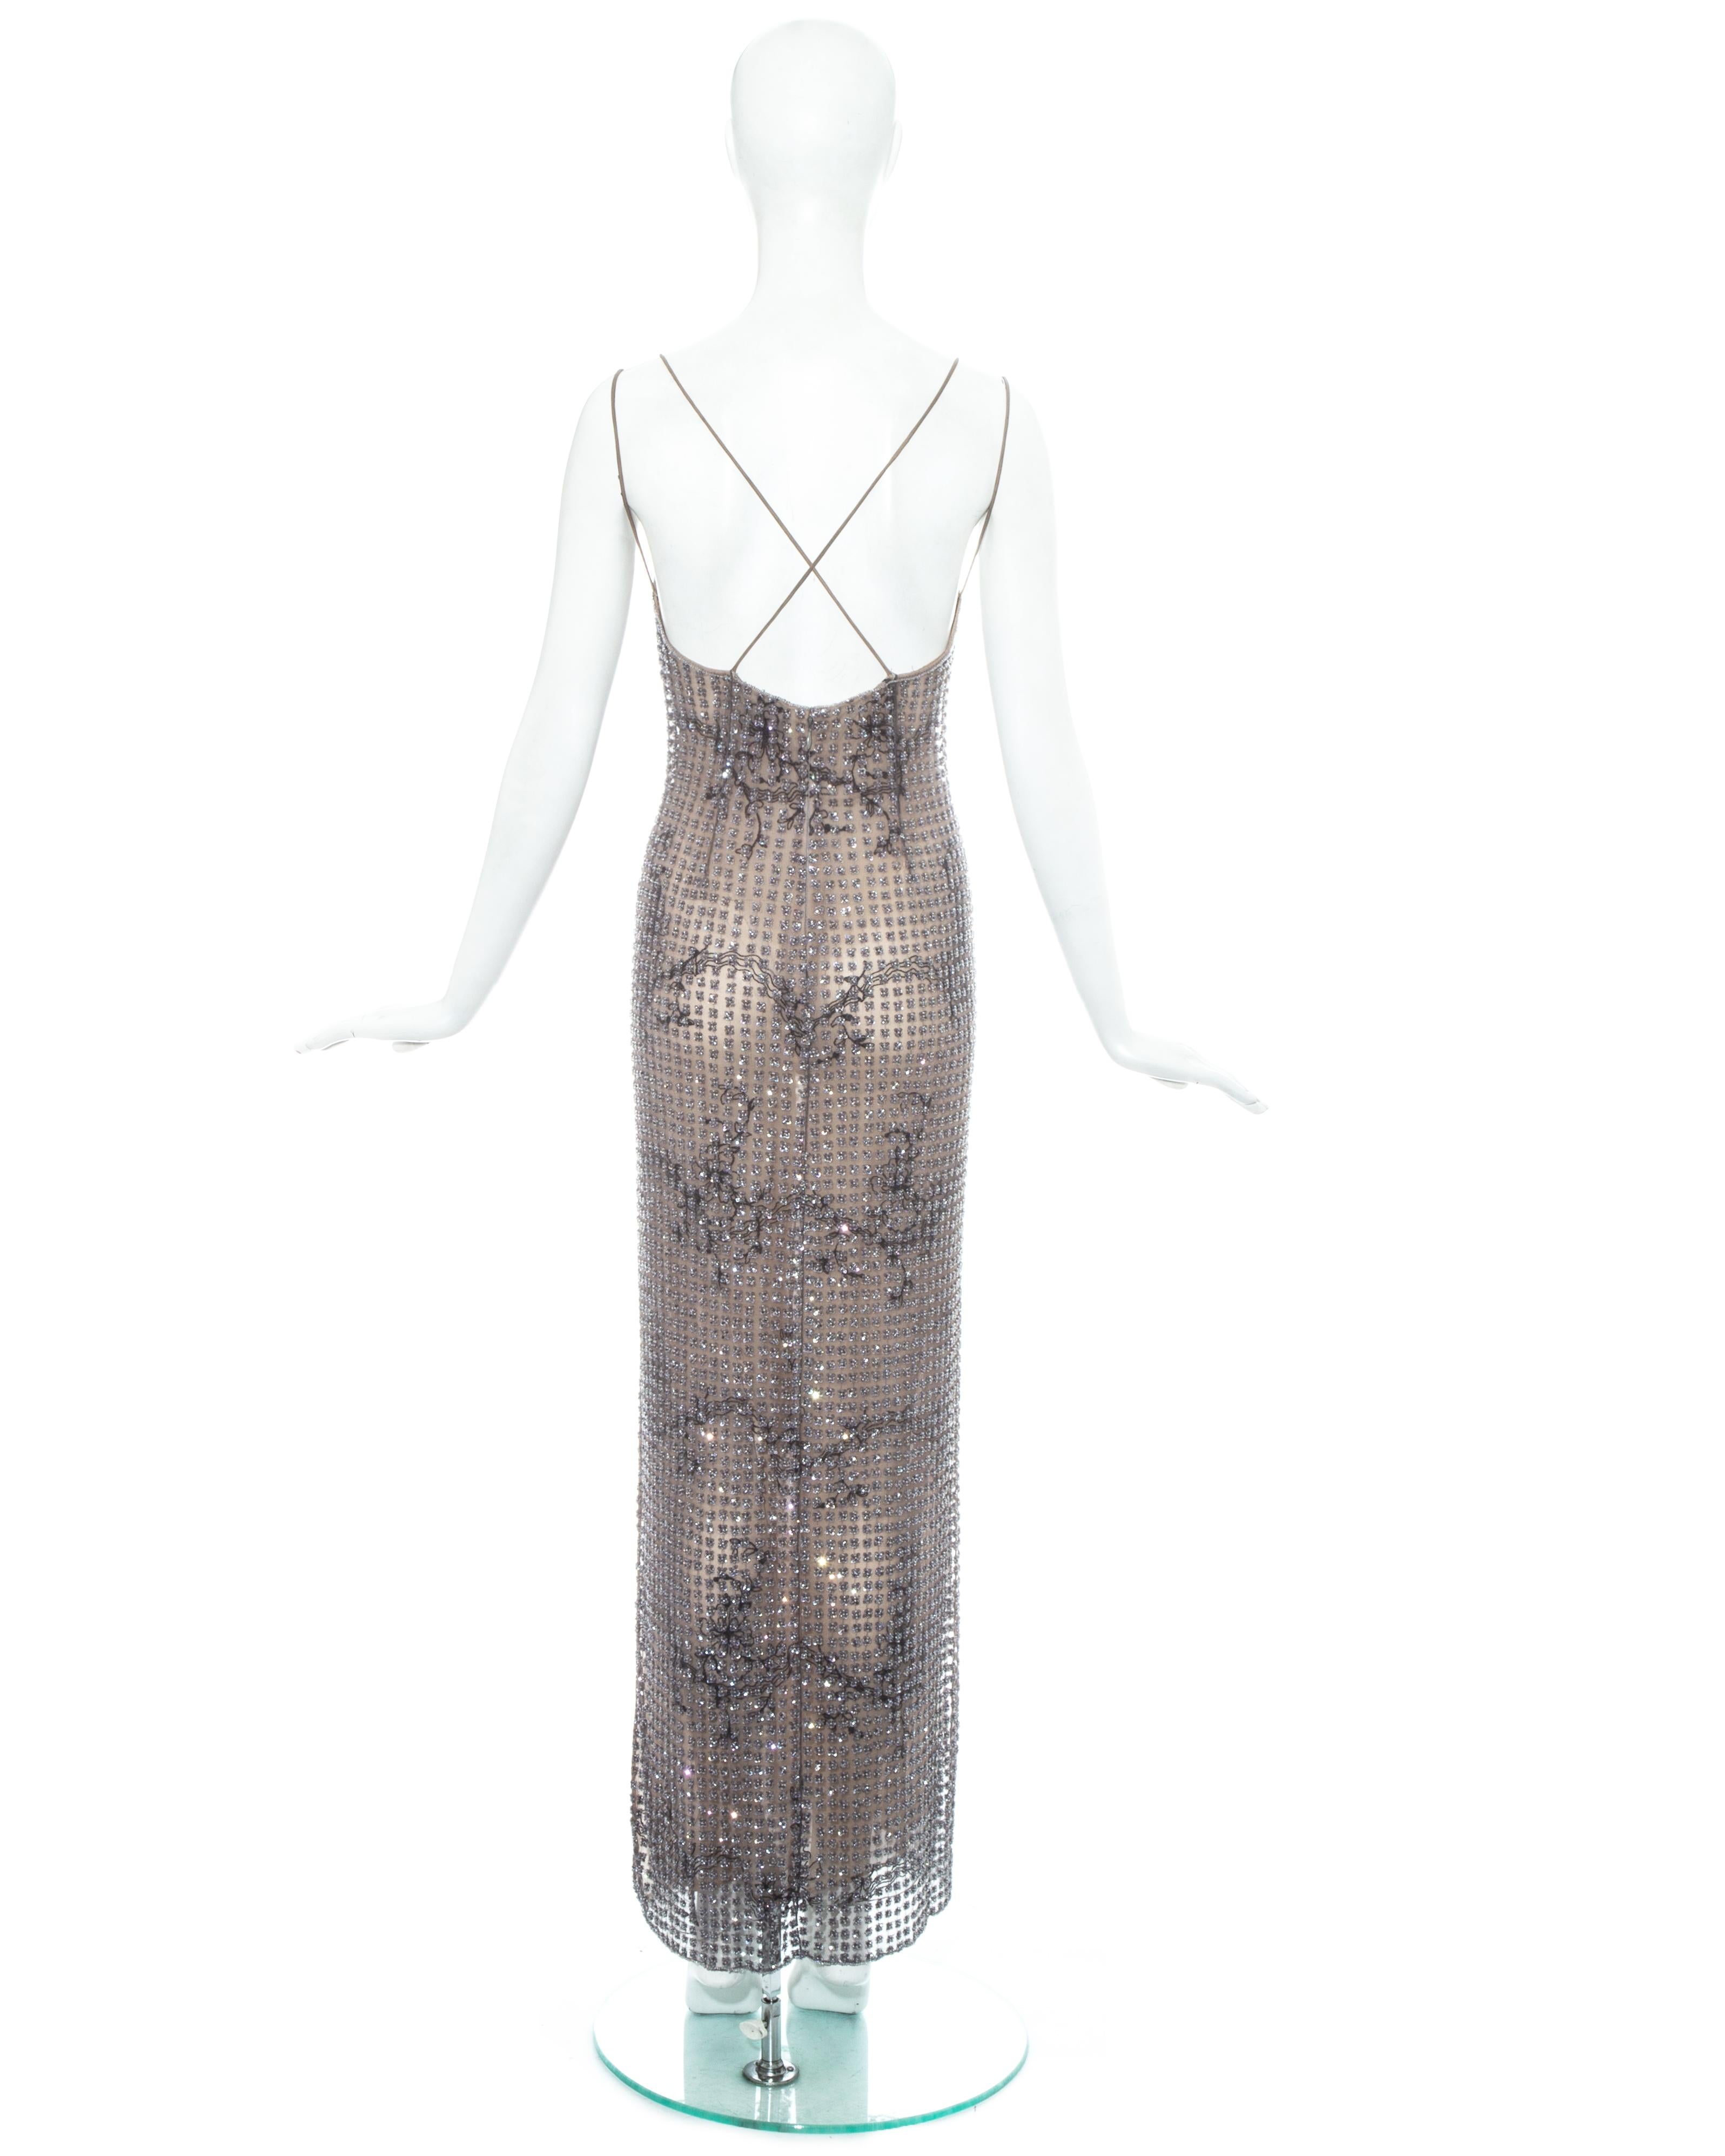 Women's or Men's Giorgio Armani purple beaded mesh and embroidered evening dress, ss 2000